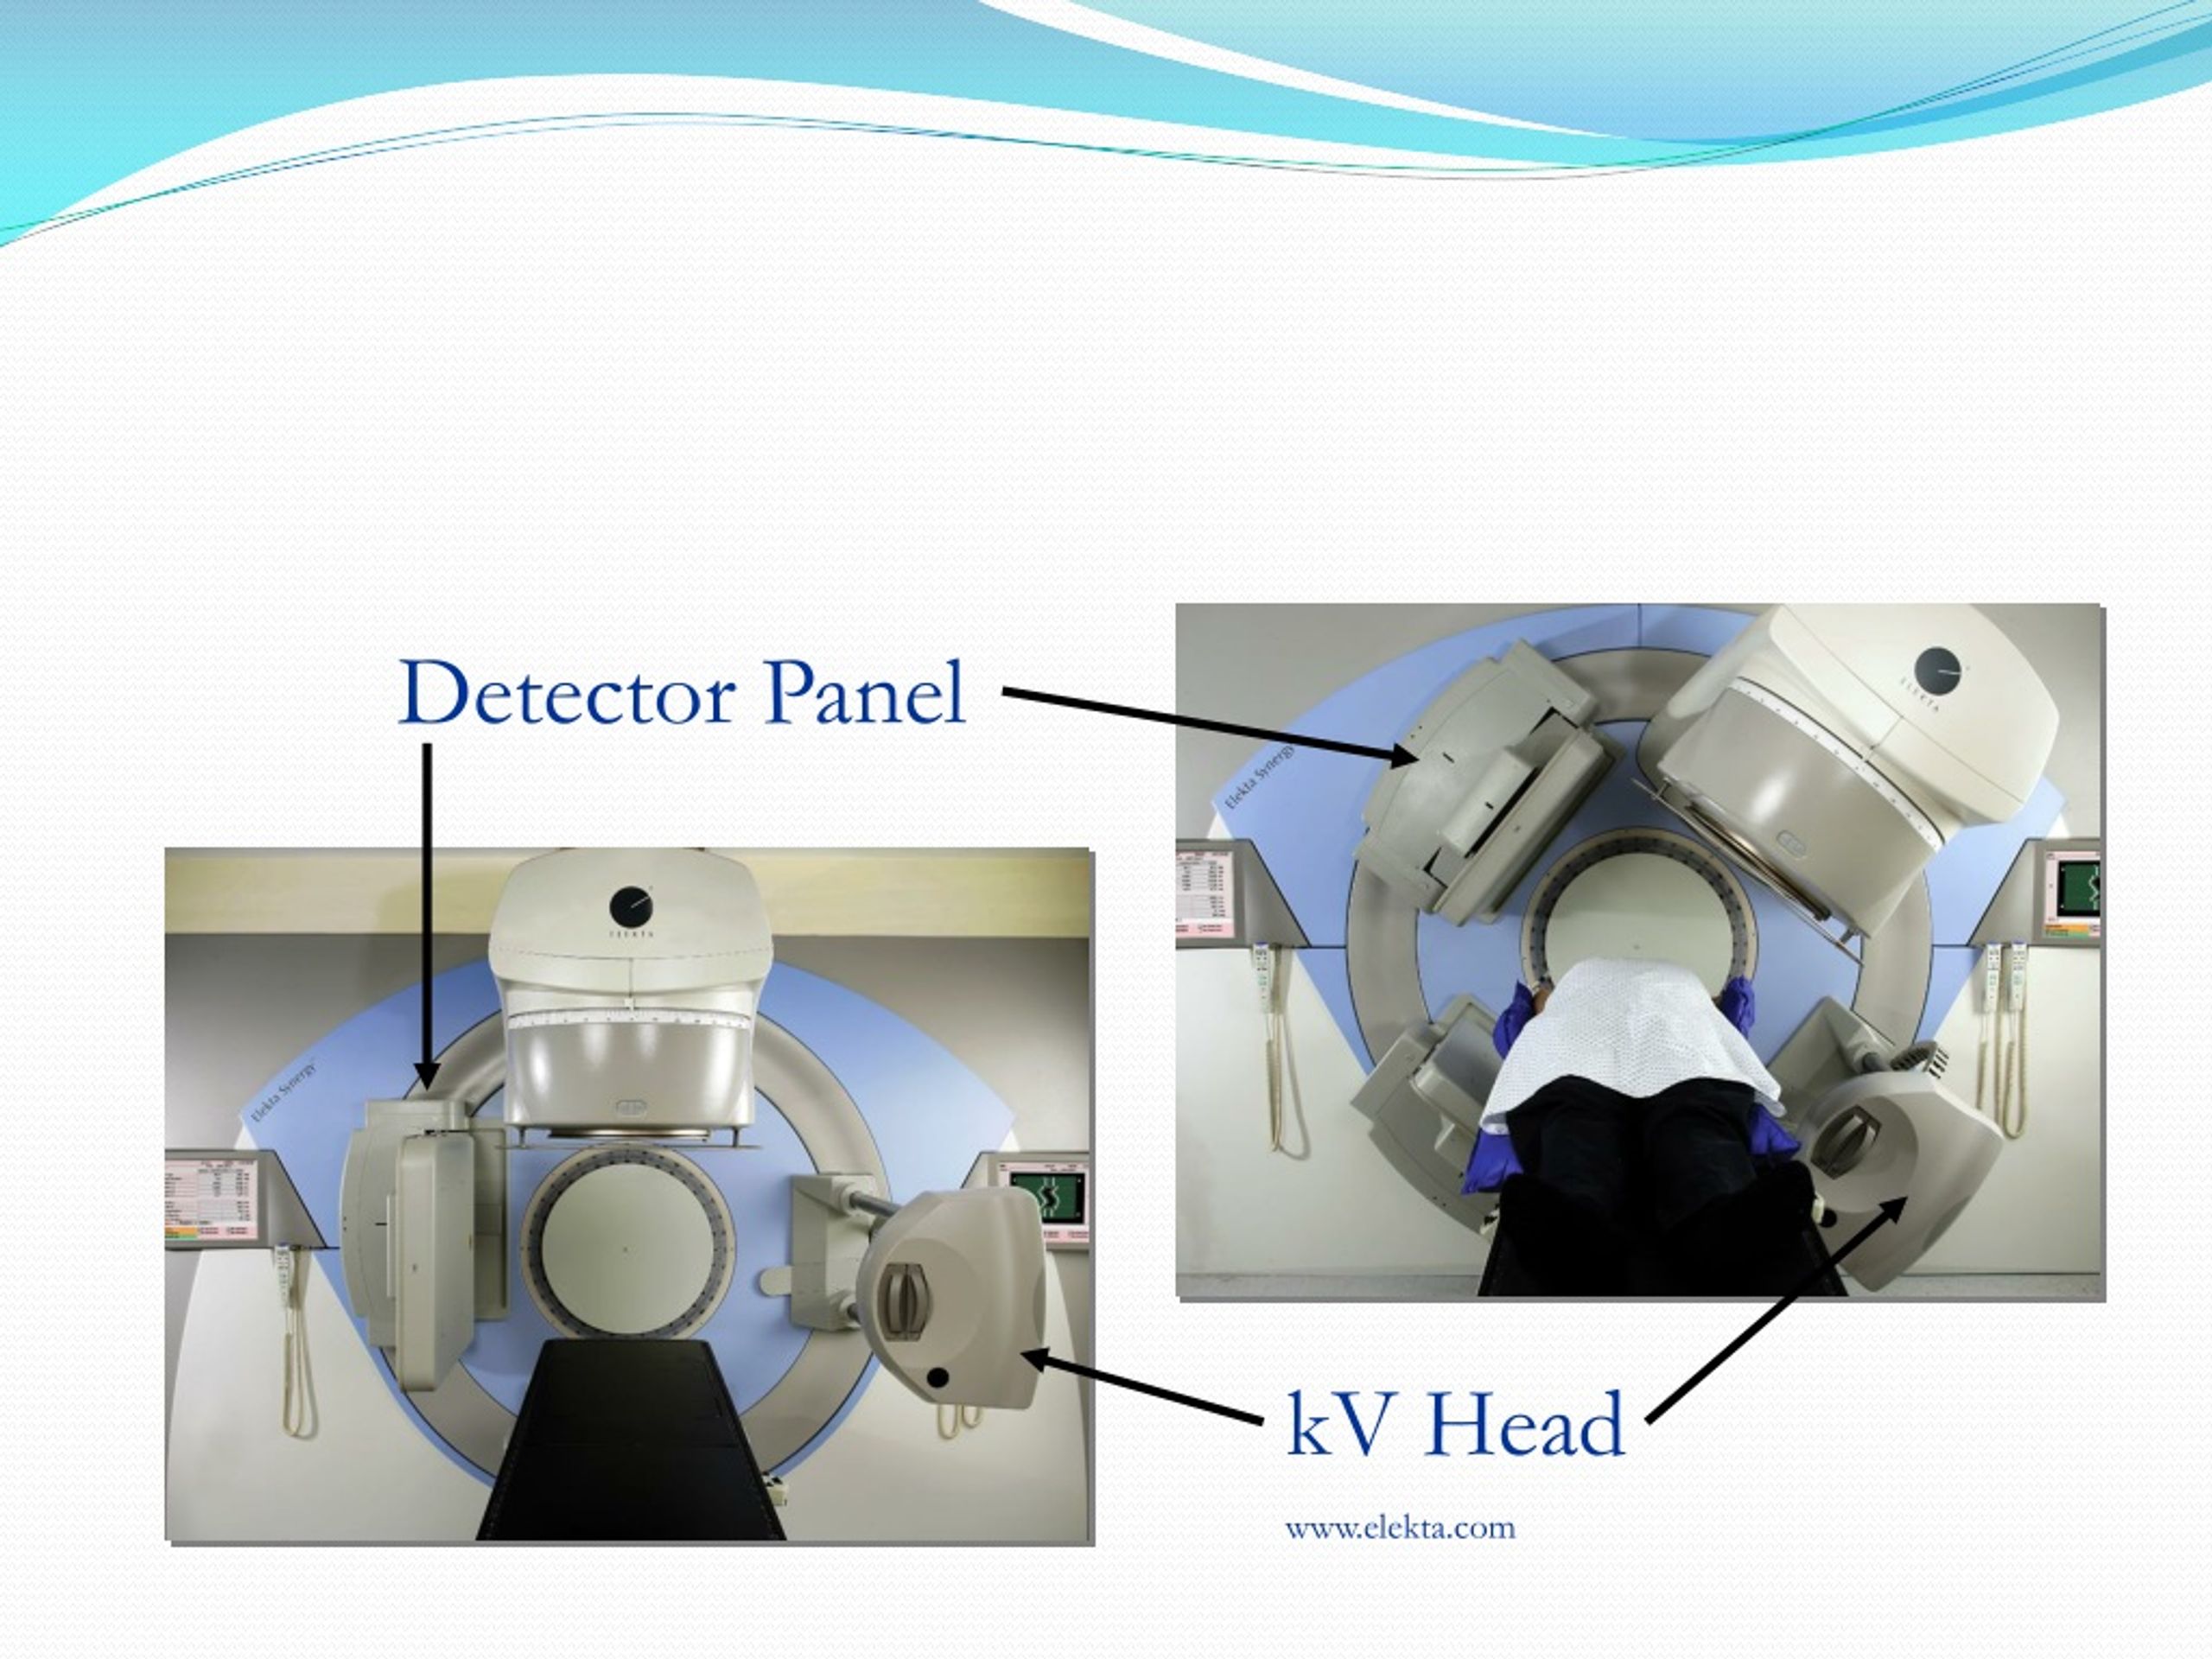 Ppt Introduction To Image Guided Radiation Therapy And Cone Beam